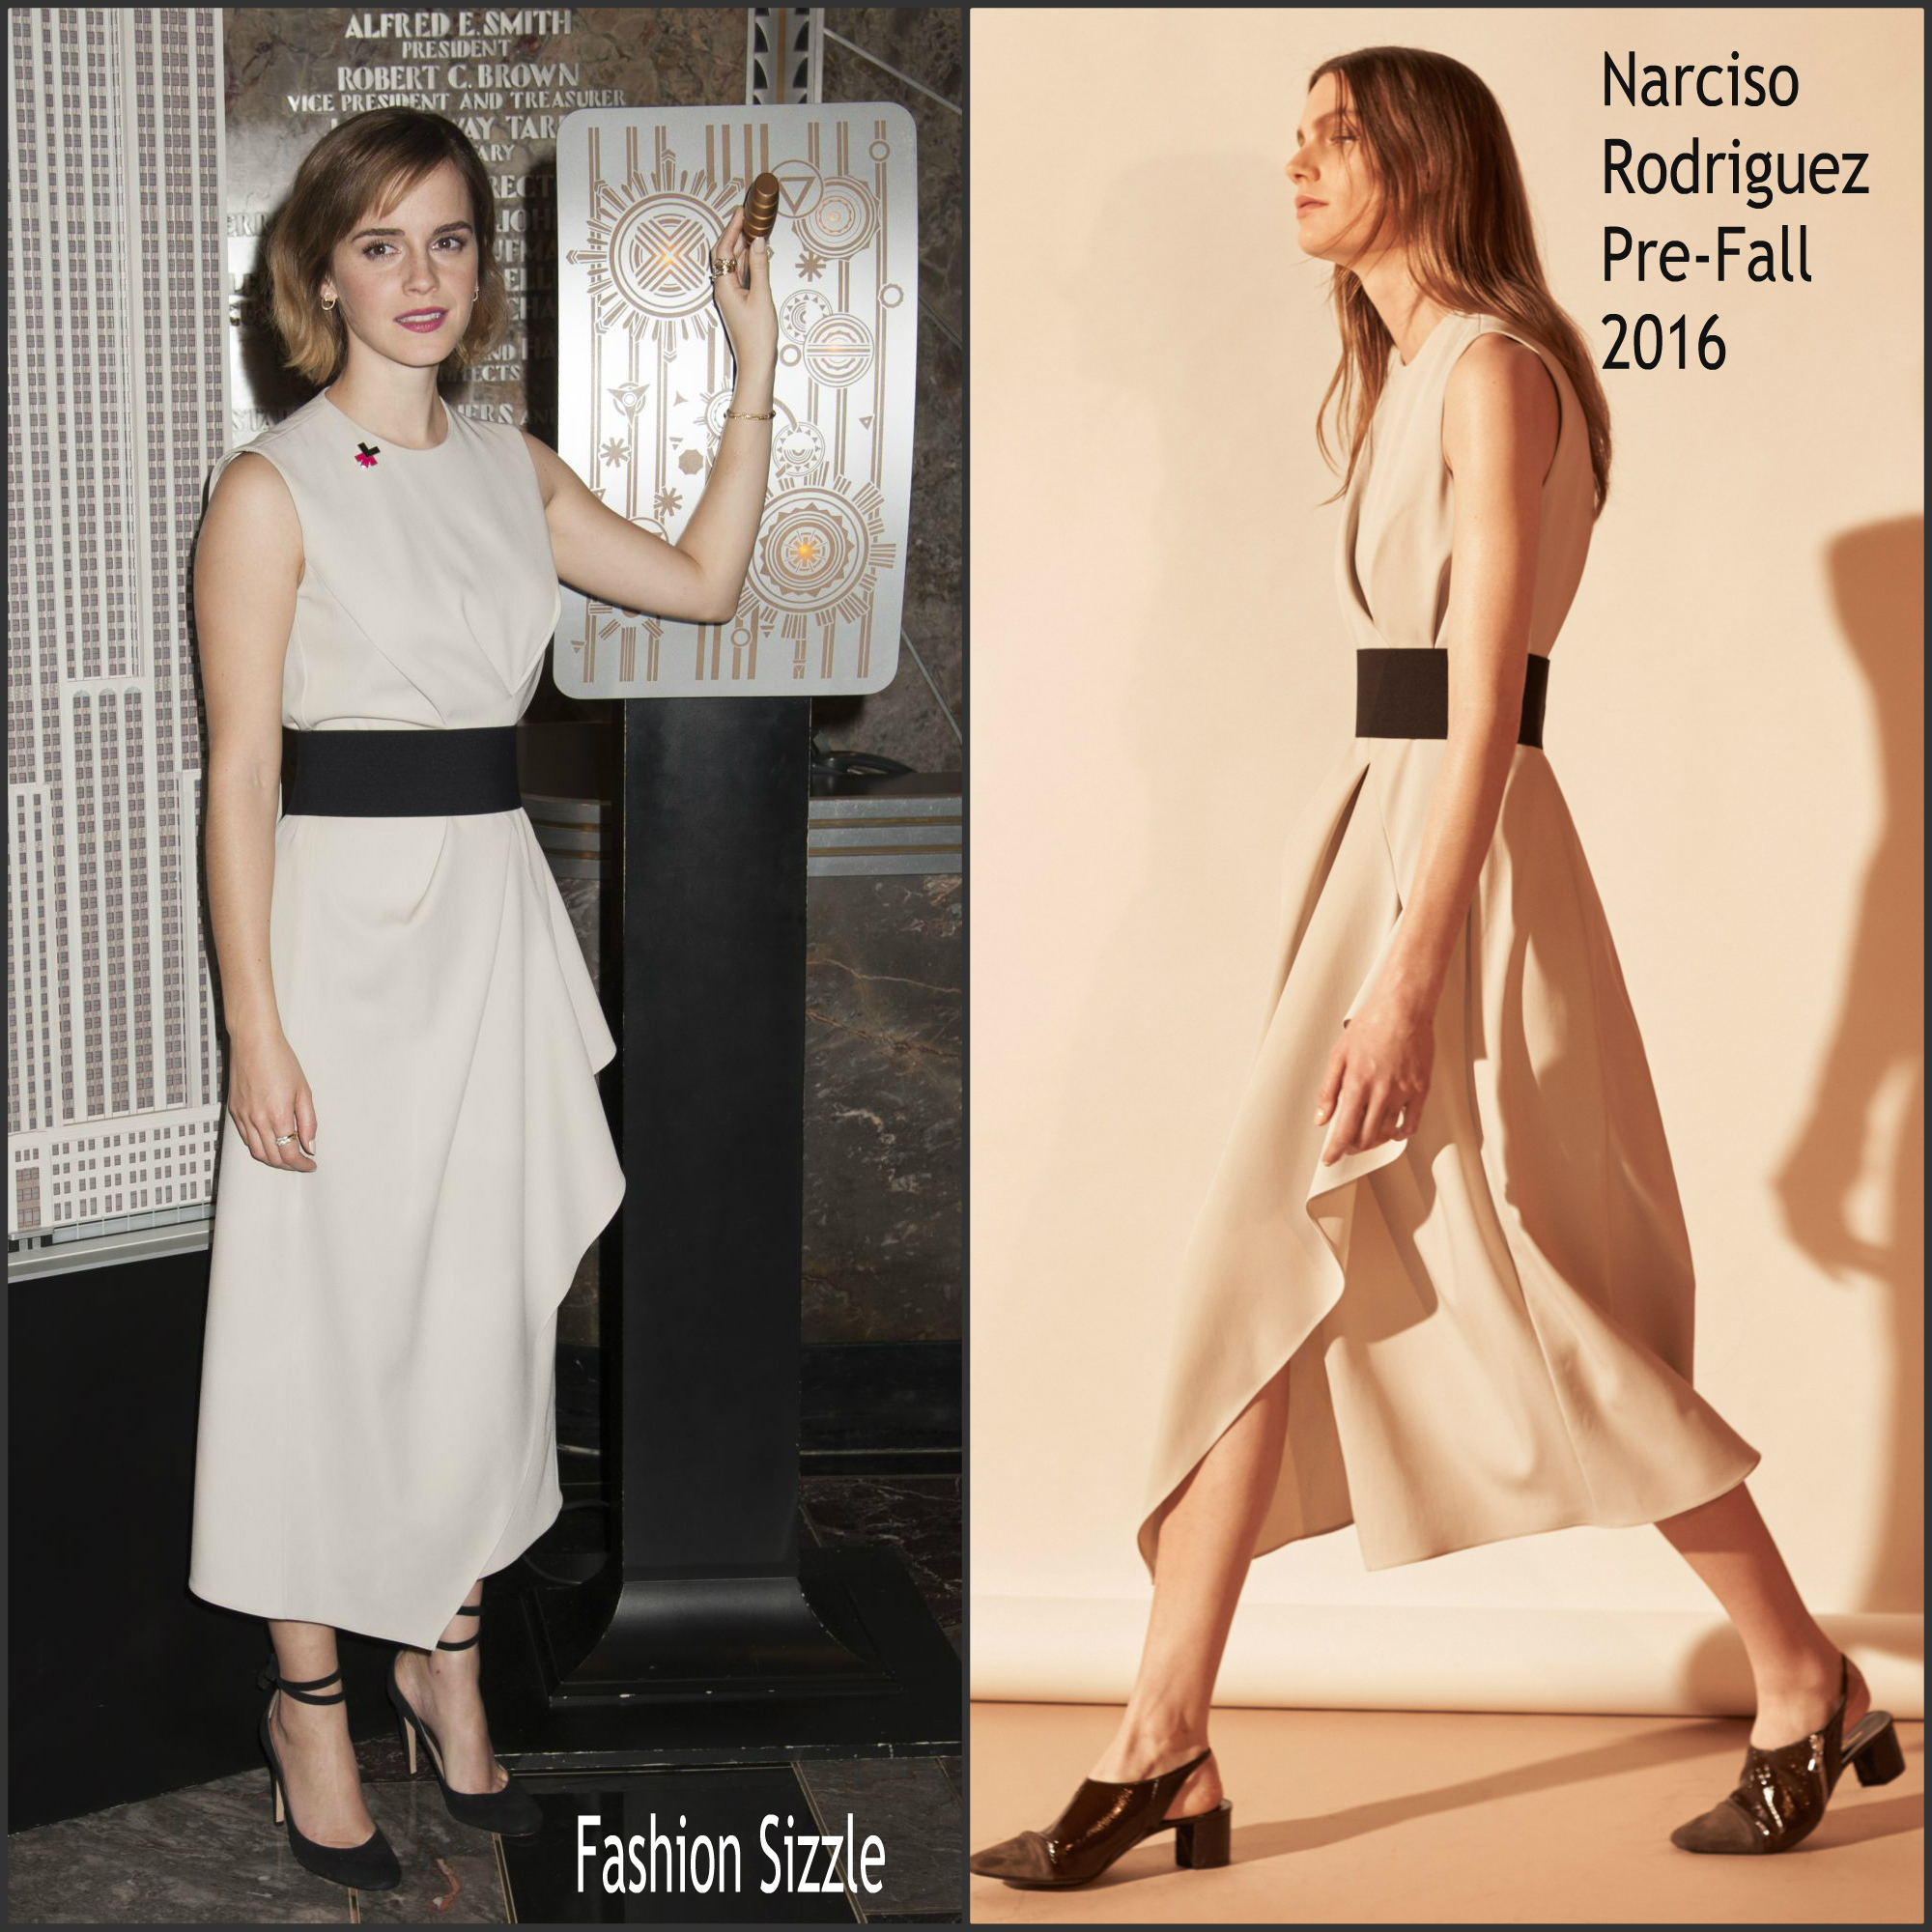 emma-watson-in-narciso-rodriguez-lights-the-empire-state-building-international-womens-day